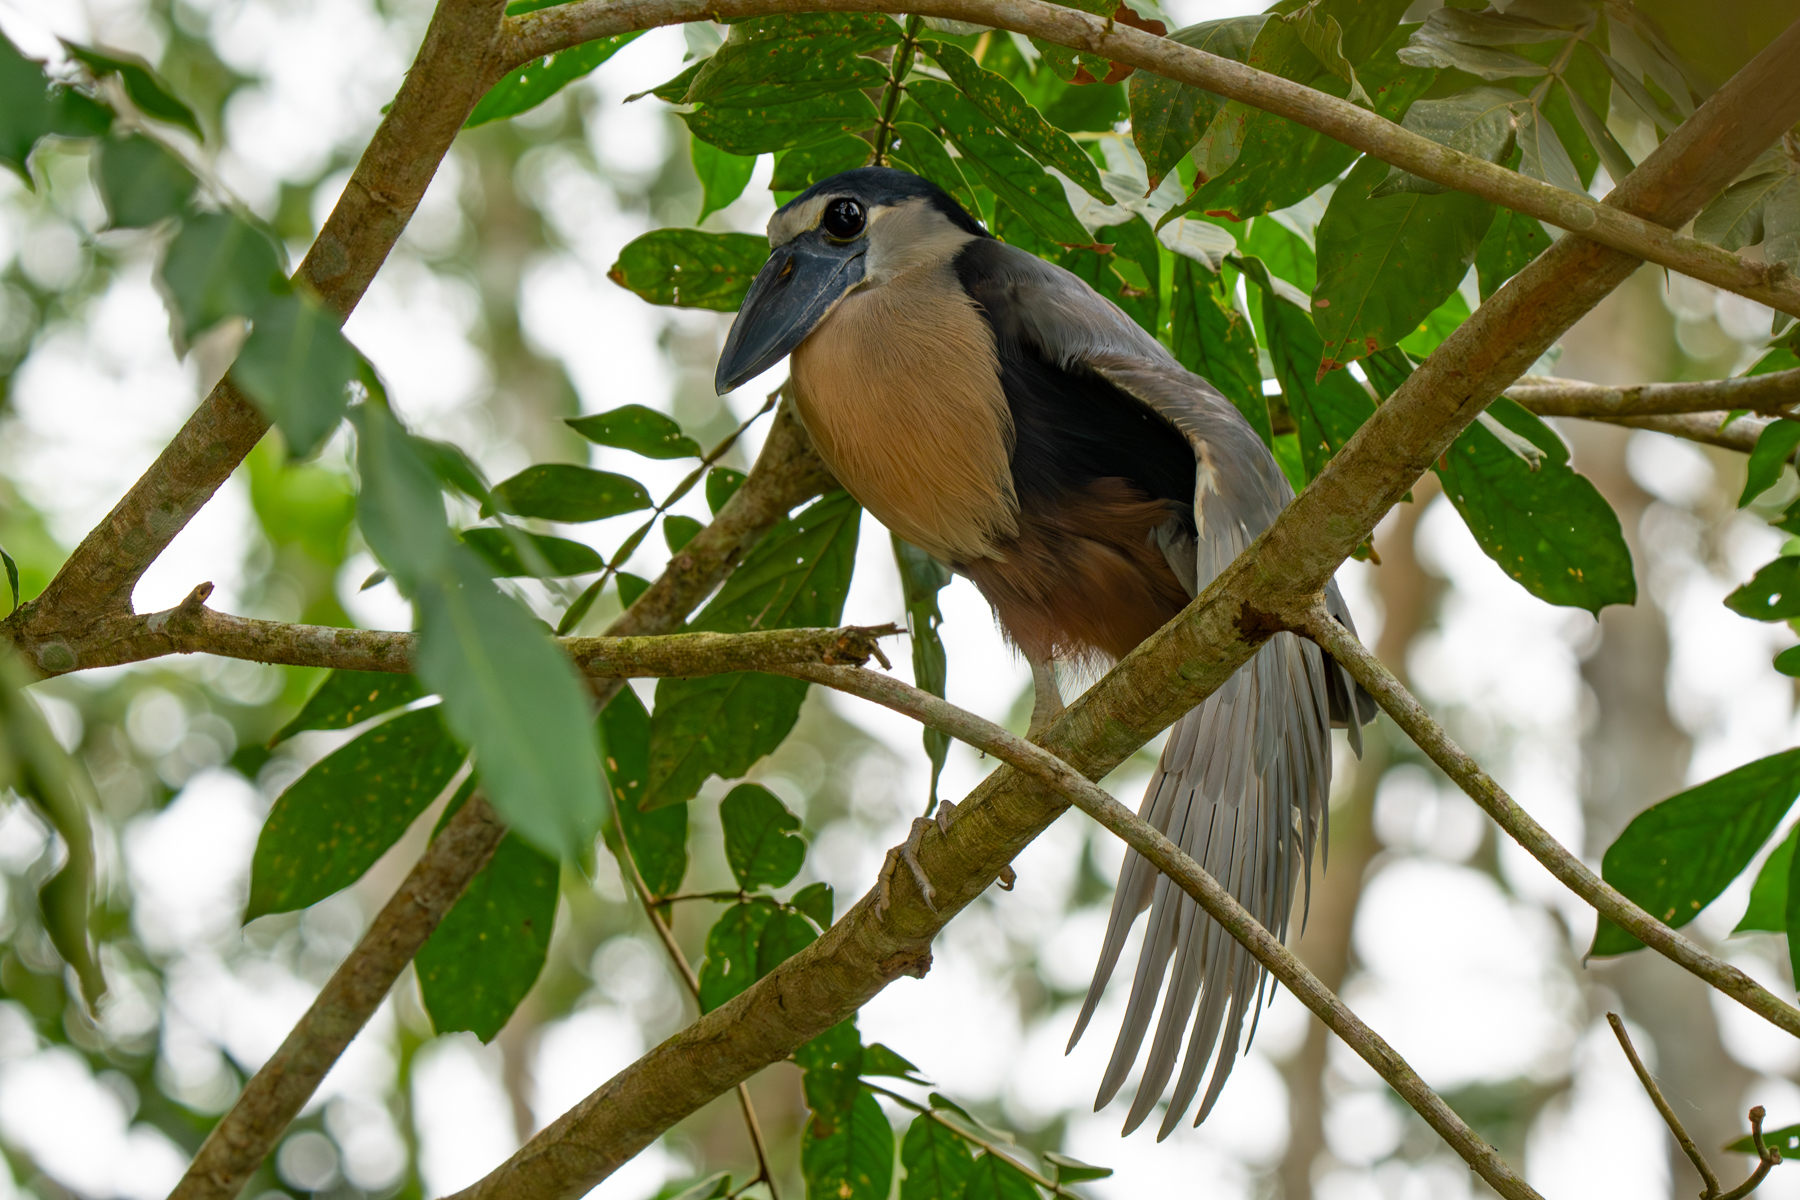 The charismatic Boat-billed Heron is normally a nocturnal species but we found one at a day roost stretching its wings (image by Inger Vandyke)